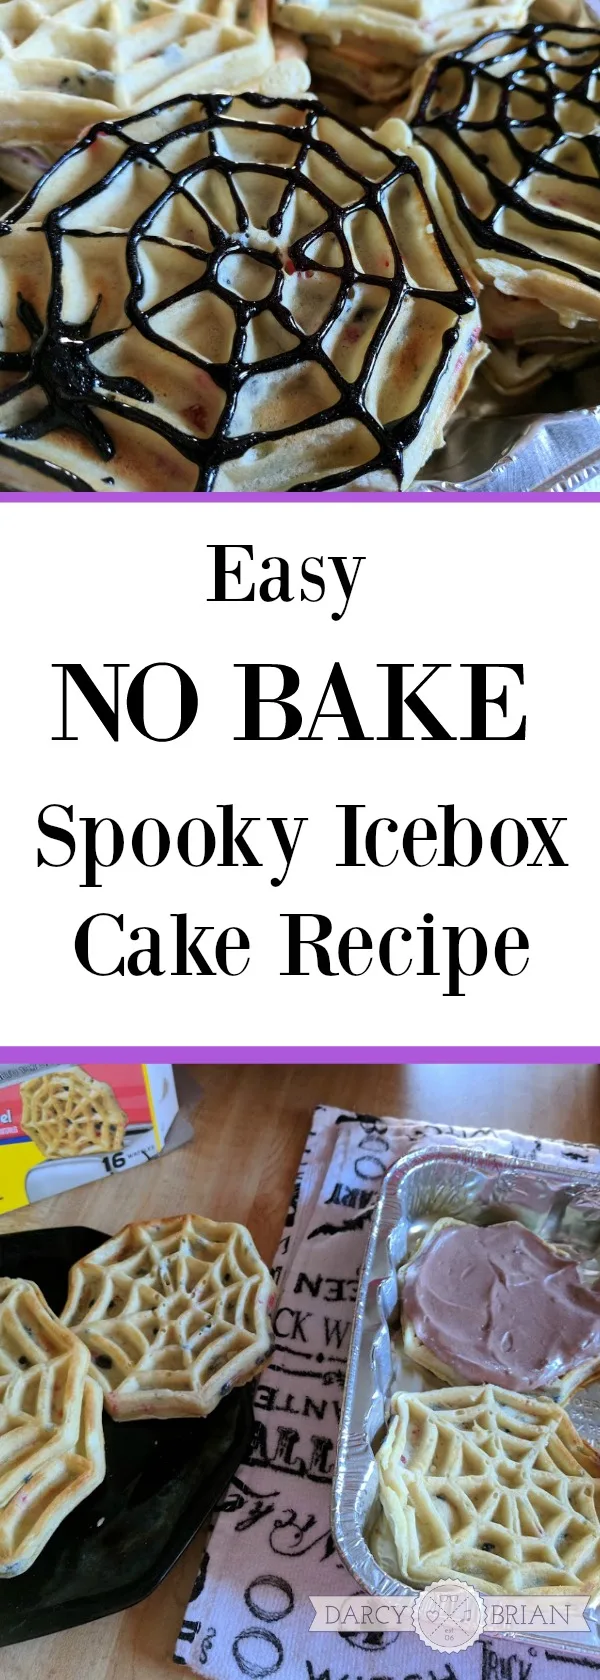 [AD] Looking for an easy no bake ice box cake #recipe for Halloween? This Spooky Icebox Cake recipe puts a twist on a classic. Great fall treat the kids can make with you for an after school snack or a Halloween party! #LeggoMyEggo #HearTheNews #AD